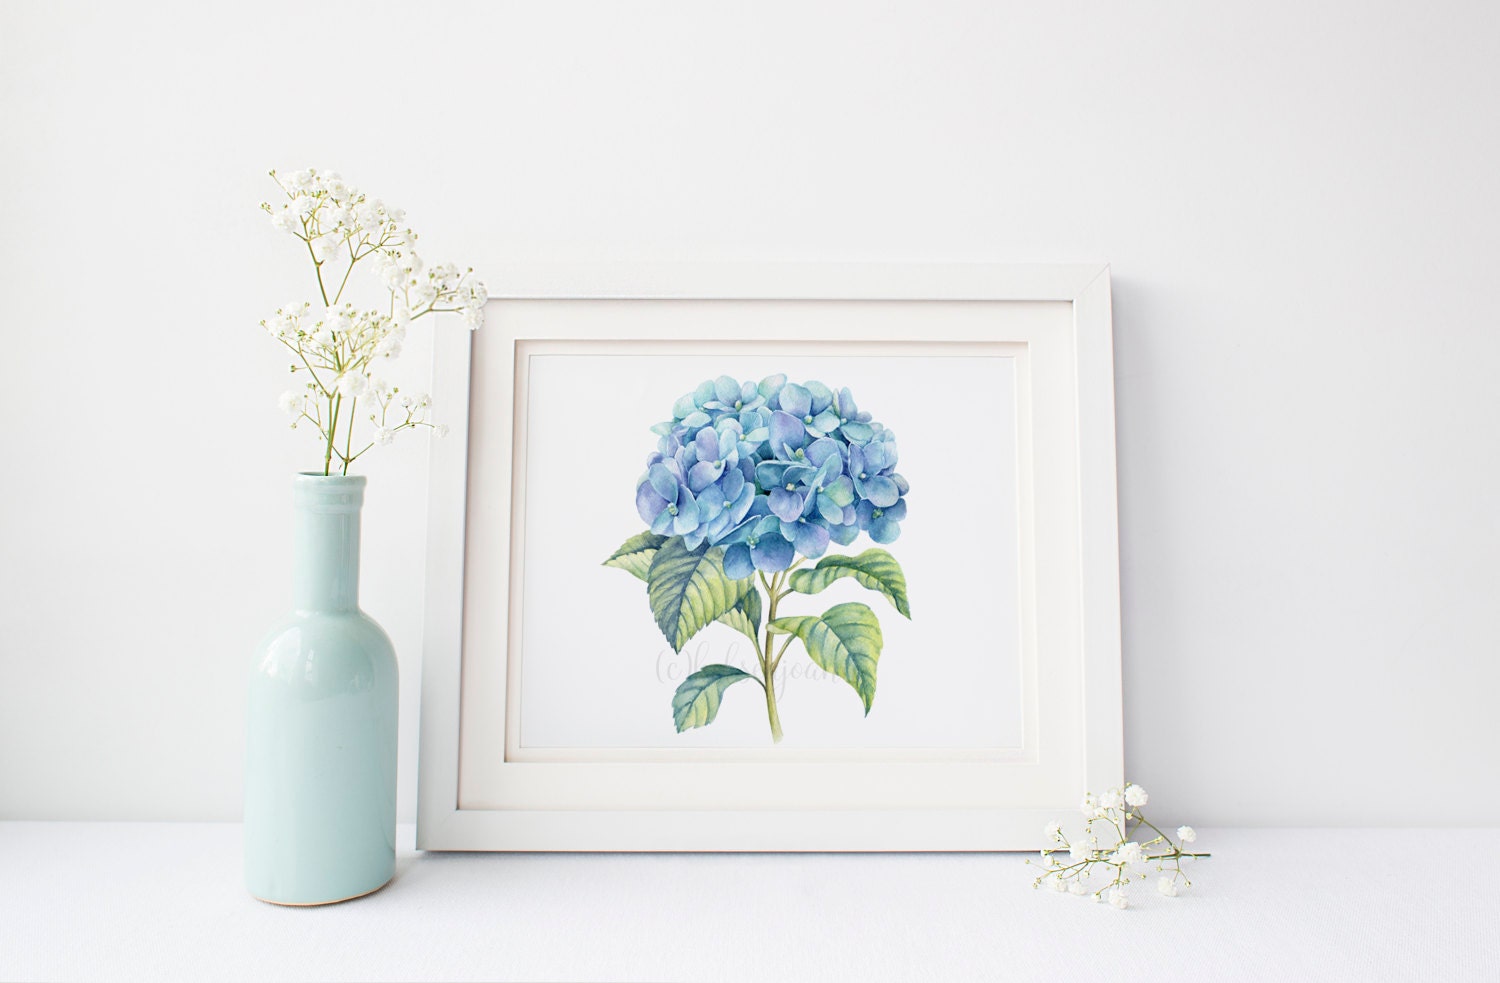 Hydrangea Decor Blue Hydrangea Wall Art Pastel Home Decor Gift for Her Delicate Watercolor Painting Whimsical Home Decor Chic Minimalist Art